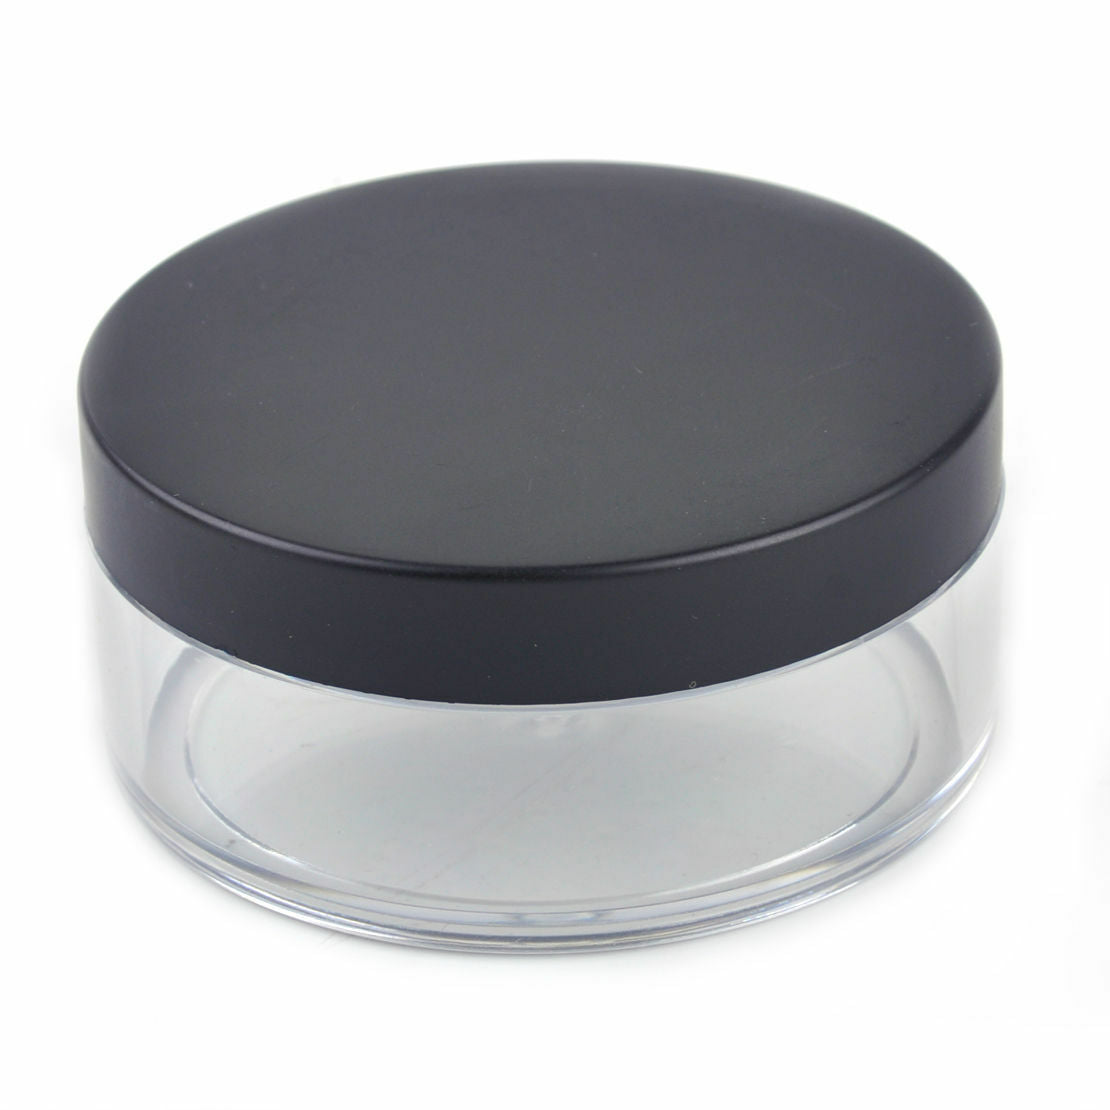 50g Powder Jar Box Case Empty Cosmetic Container Sponge Puff for Makeup Travel